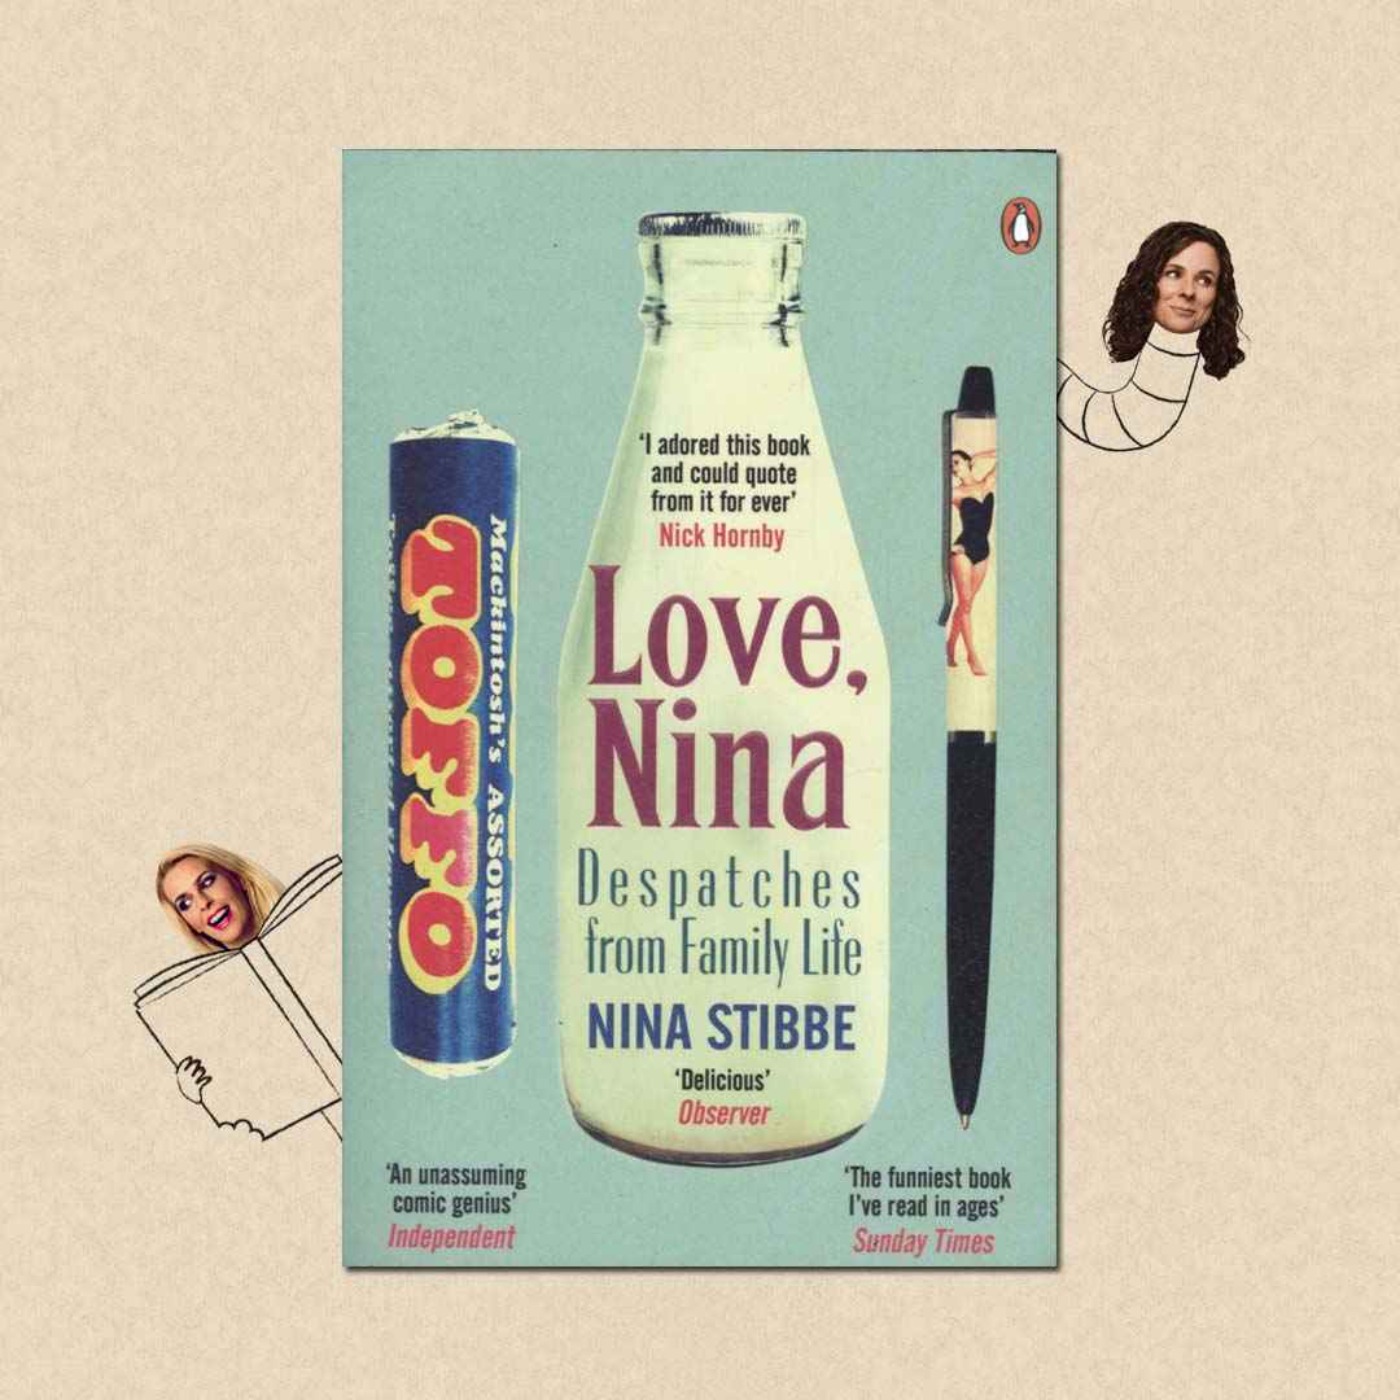 cover art for Love, Nina by Nina Stibbe with Rachel Parris